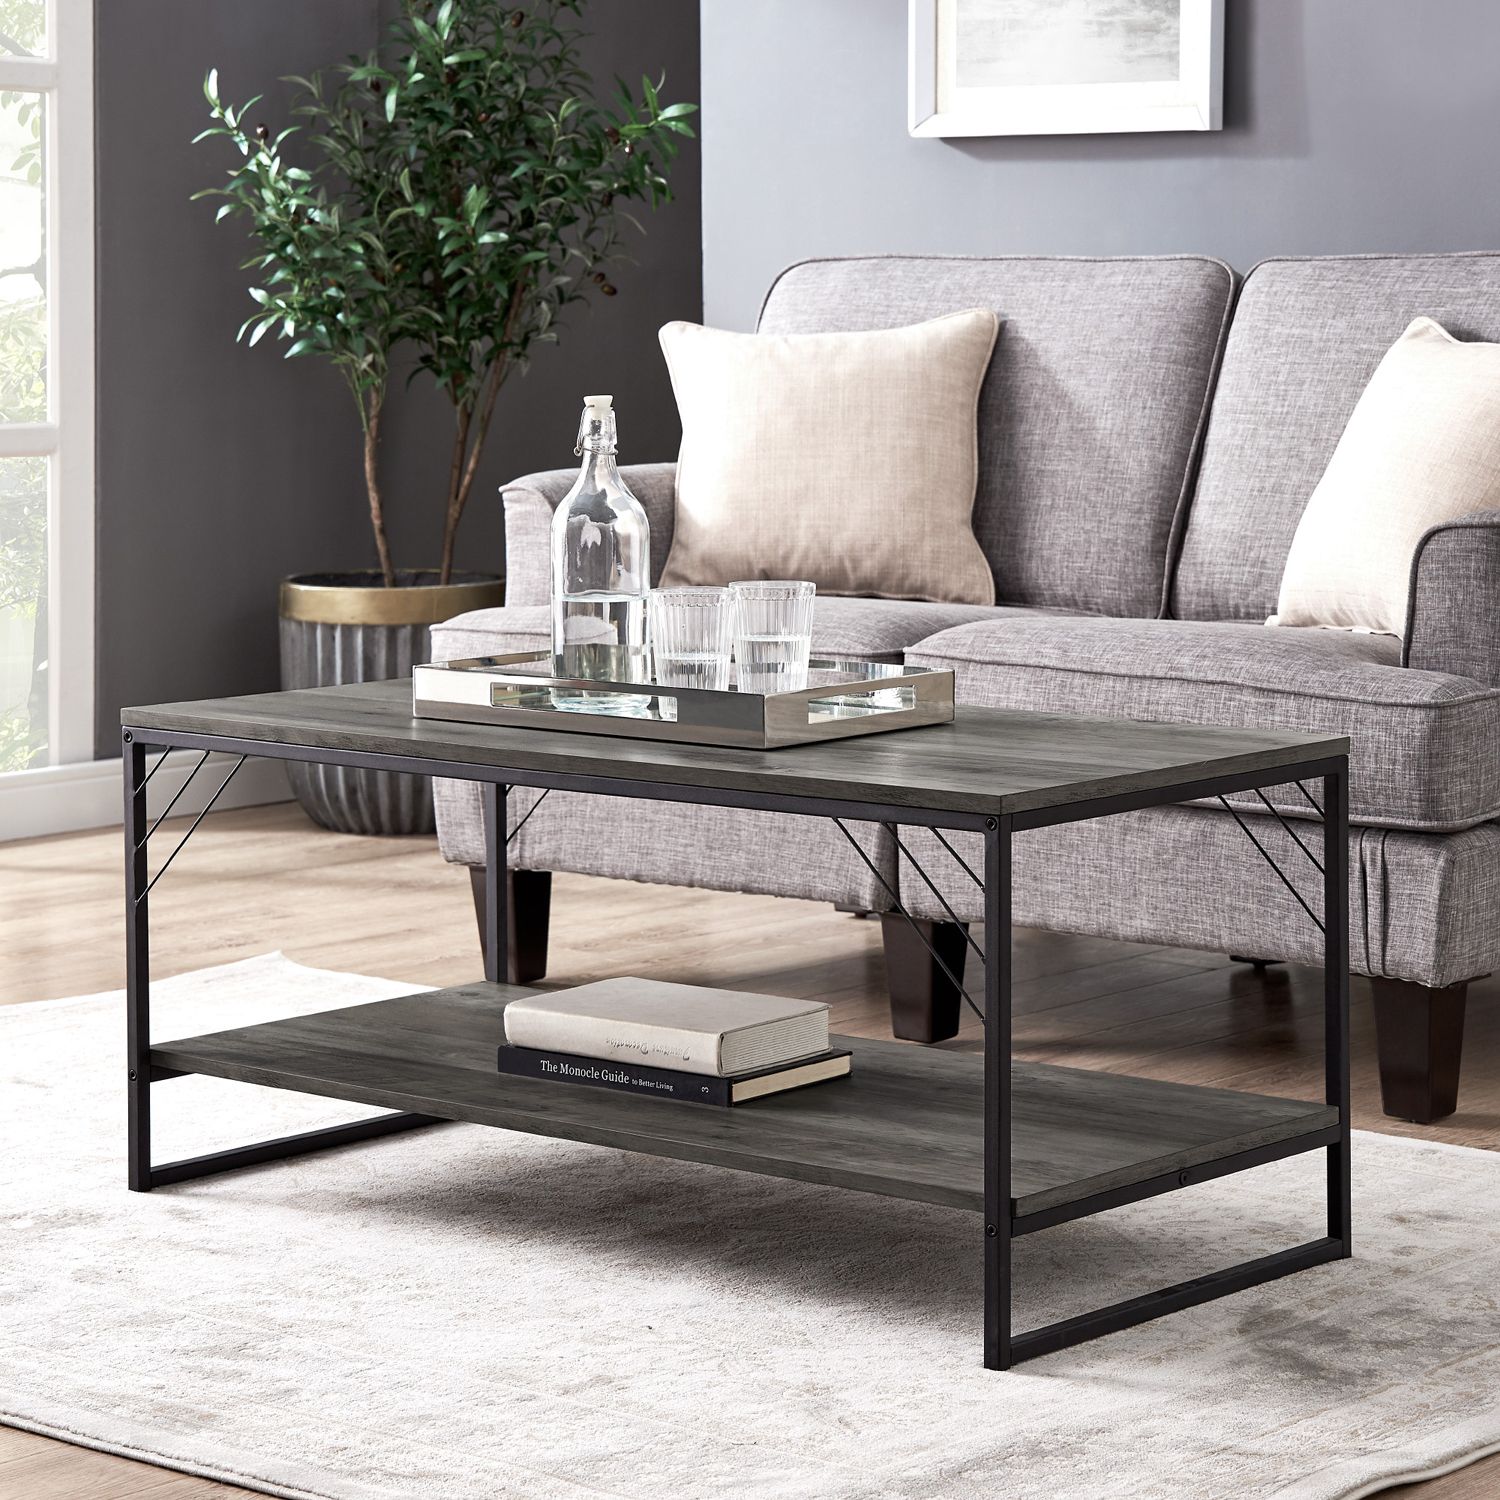 Industrial Metal Accent Gray Wash Coffee Table – Pier1 Imports Throughout Glossy Finished Metal Coffee Tables (Gallery 15 of 20)